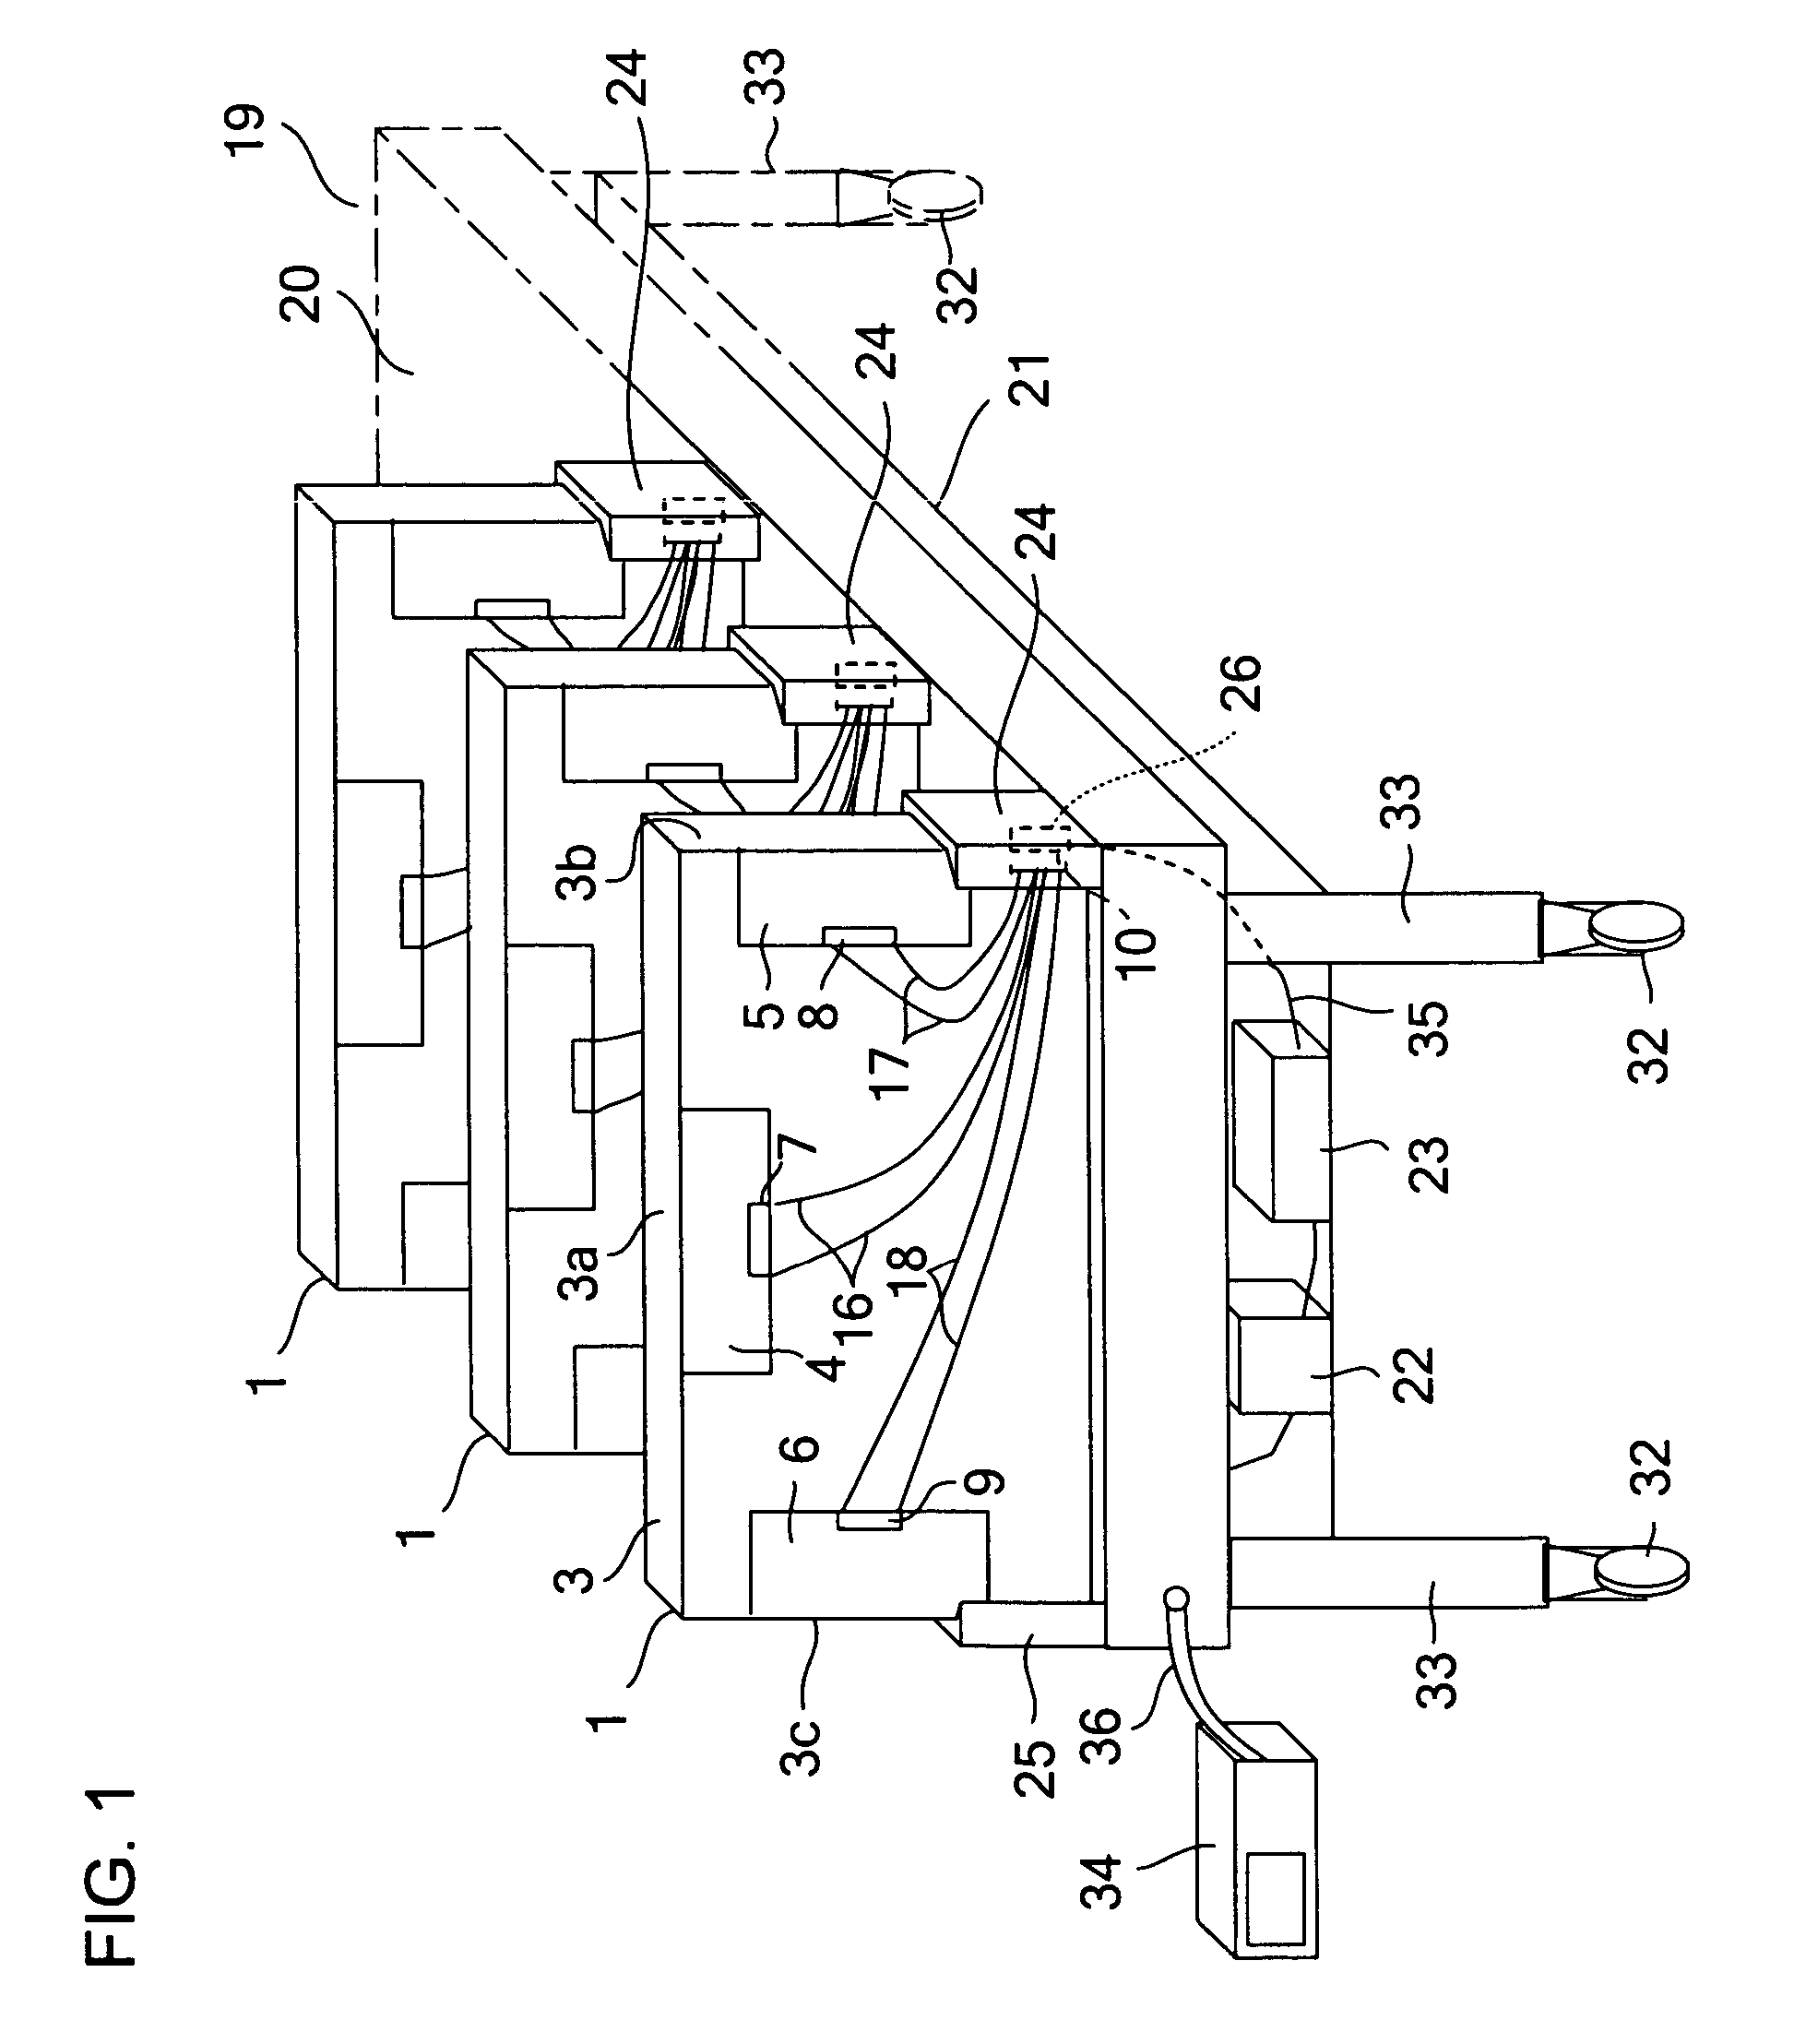 Inspection apparatus for inspecting a display module